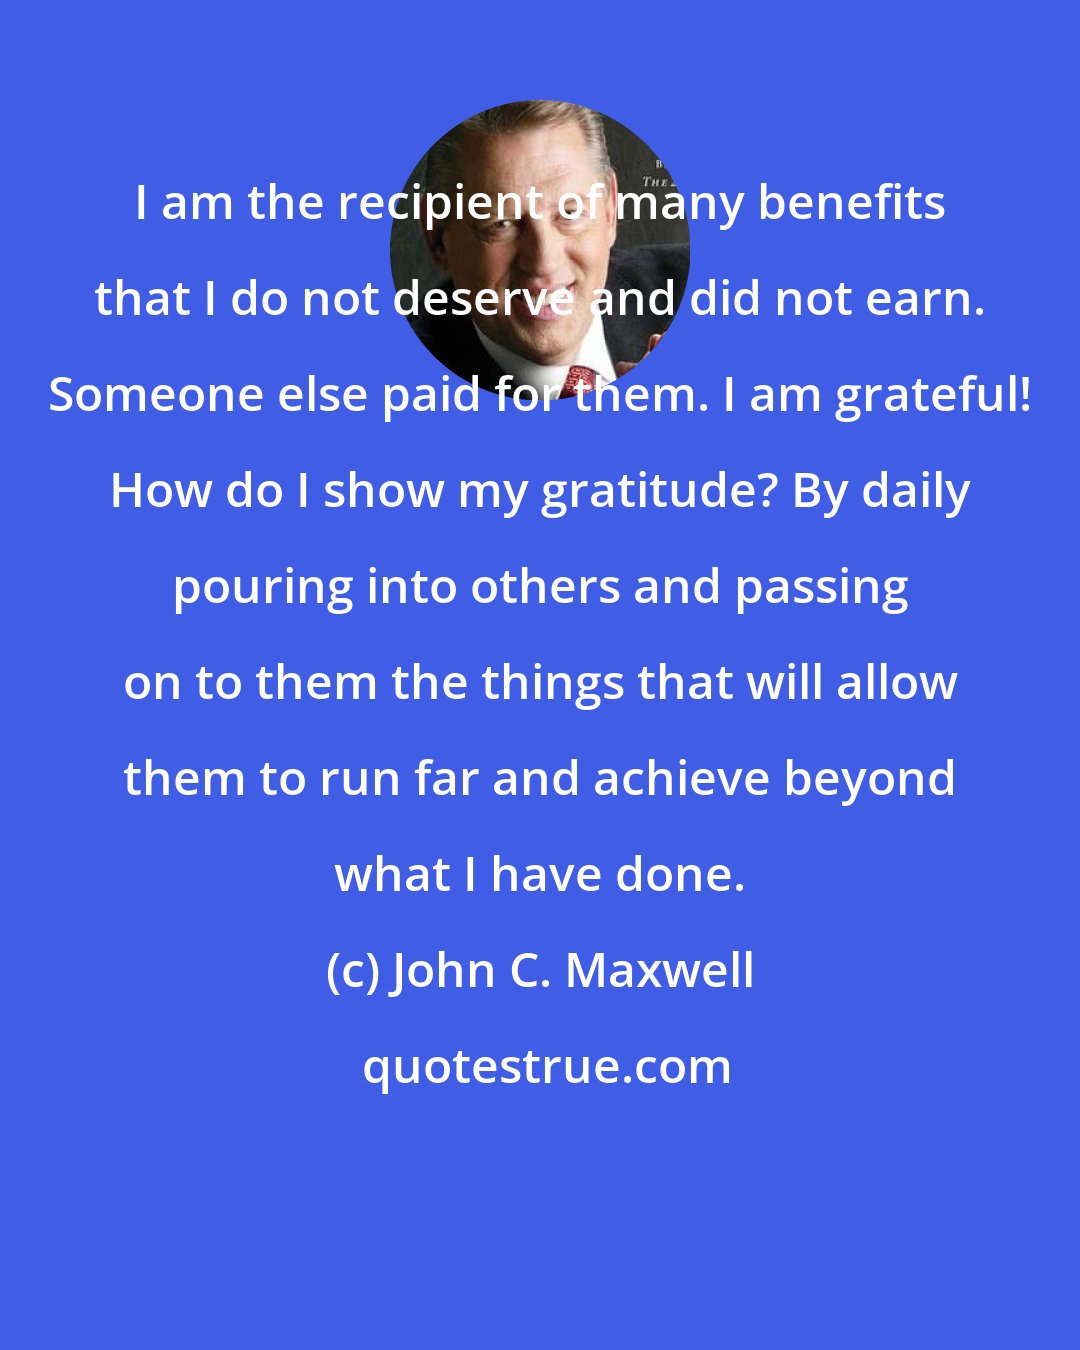 John C. Maxwell: I am the recipient of many benefits that I do not deserve and did not earn. Someone else paid for them. I am grateful! How do I show my gratitude? By daily pouring into others and passing on to them the things that will allow them to run far and achieve beyond what I have done.